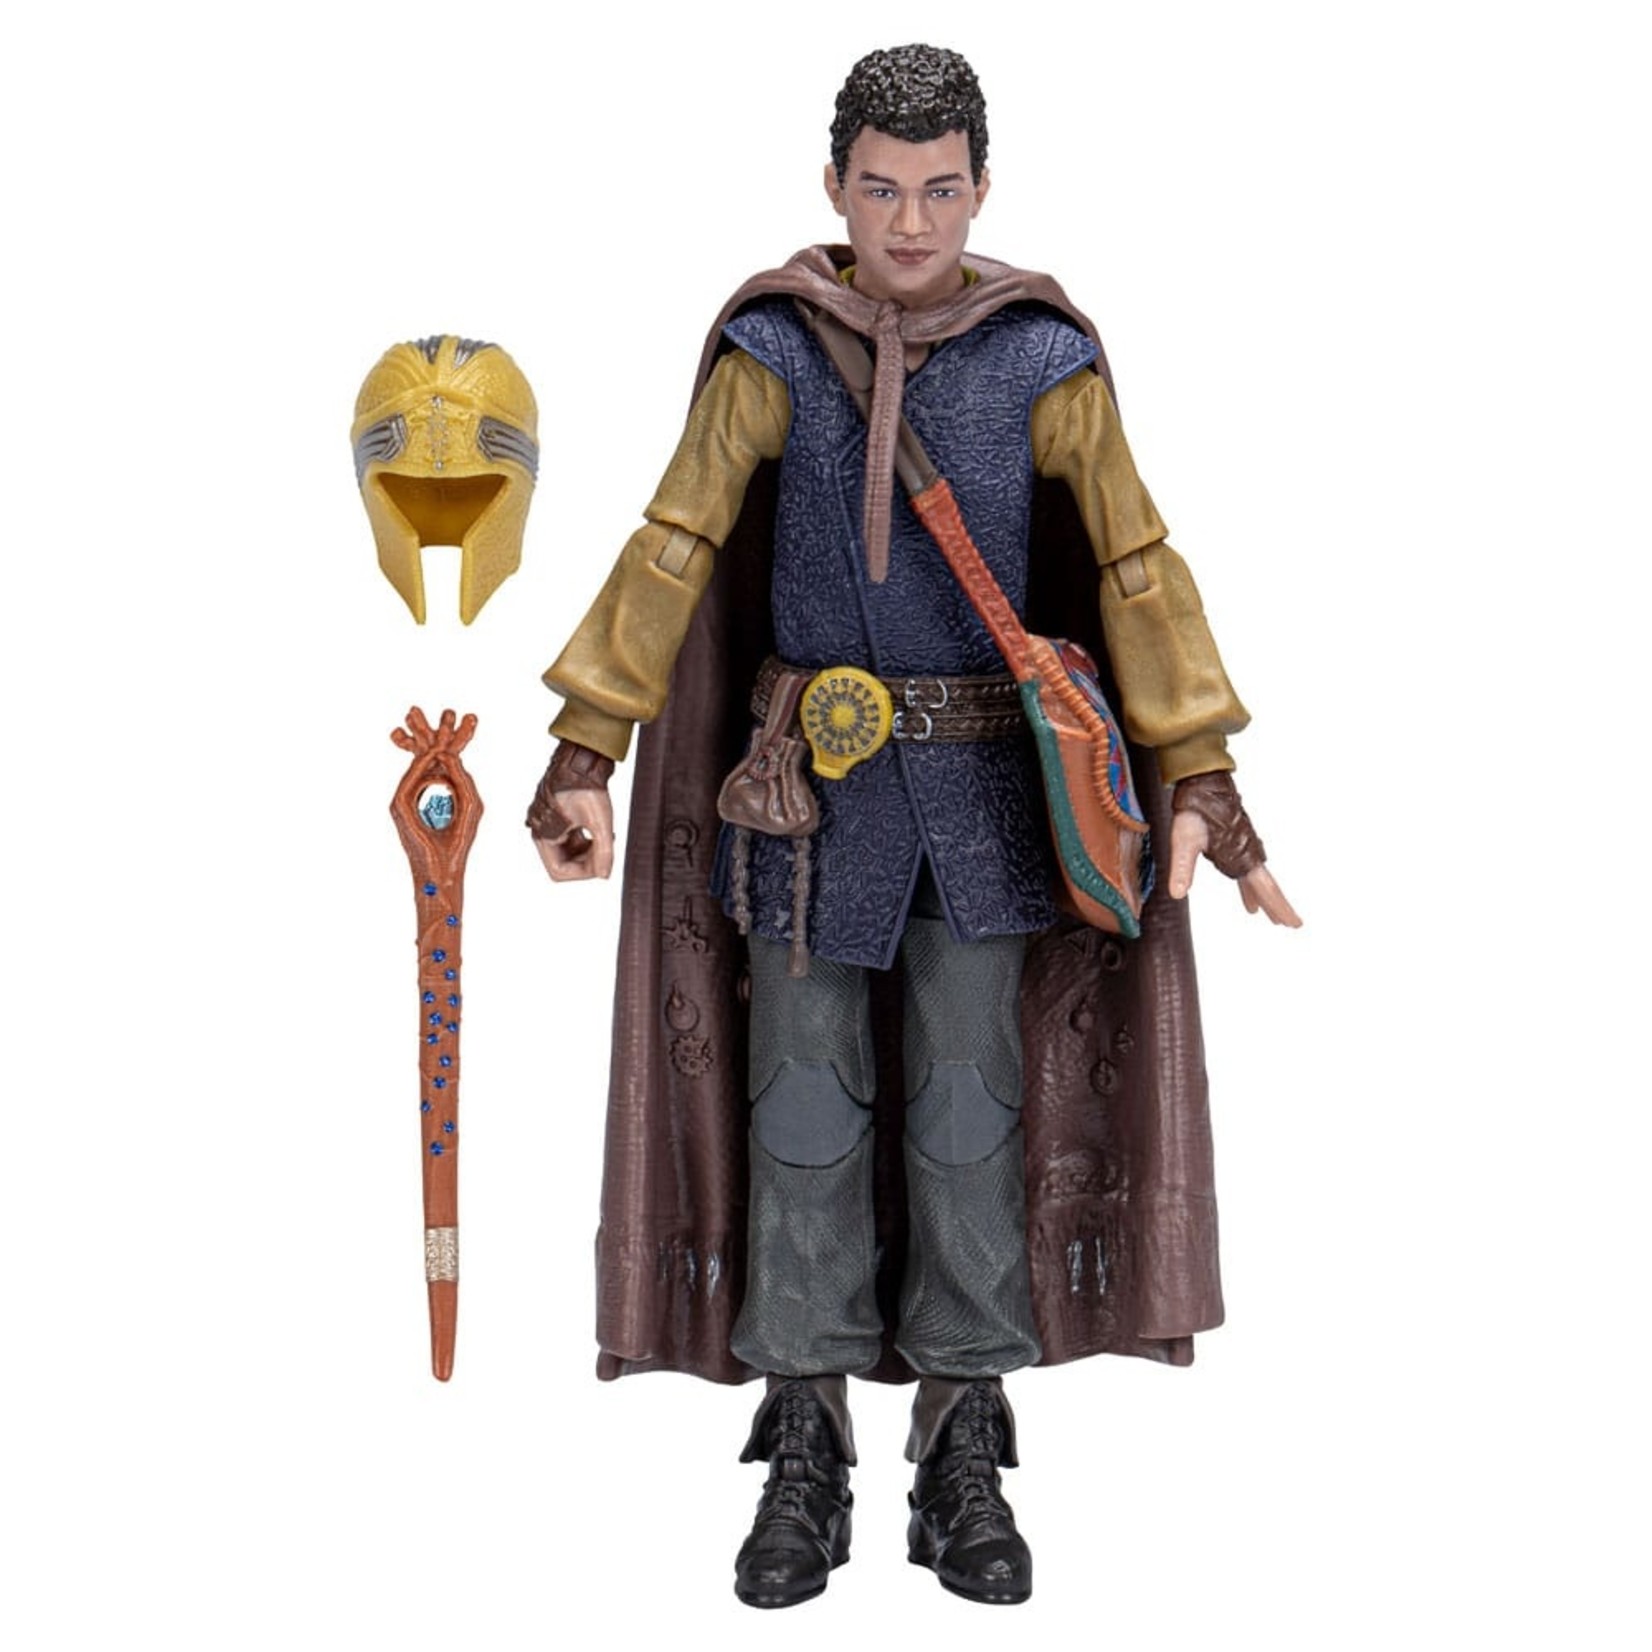 Hasbro Hasbro Dungeons & Dragons Honor Among Thieves Golden Archive Action Figure Simon 15 cm